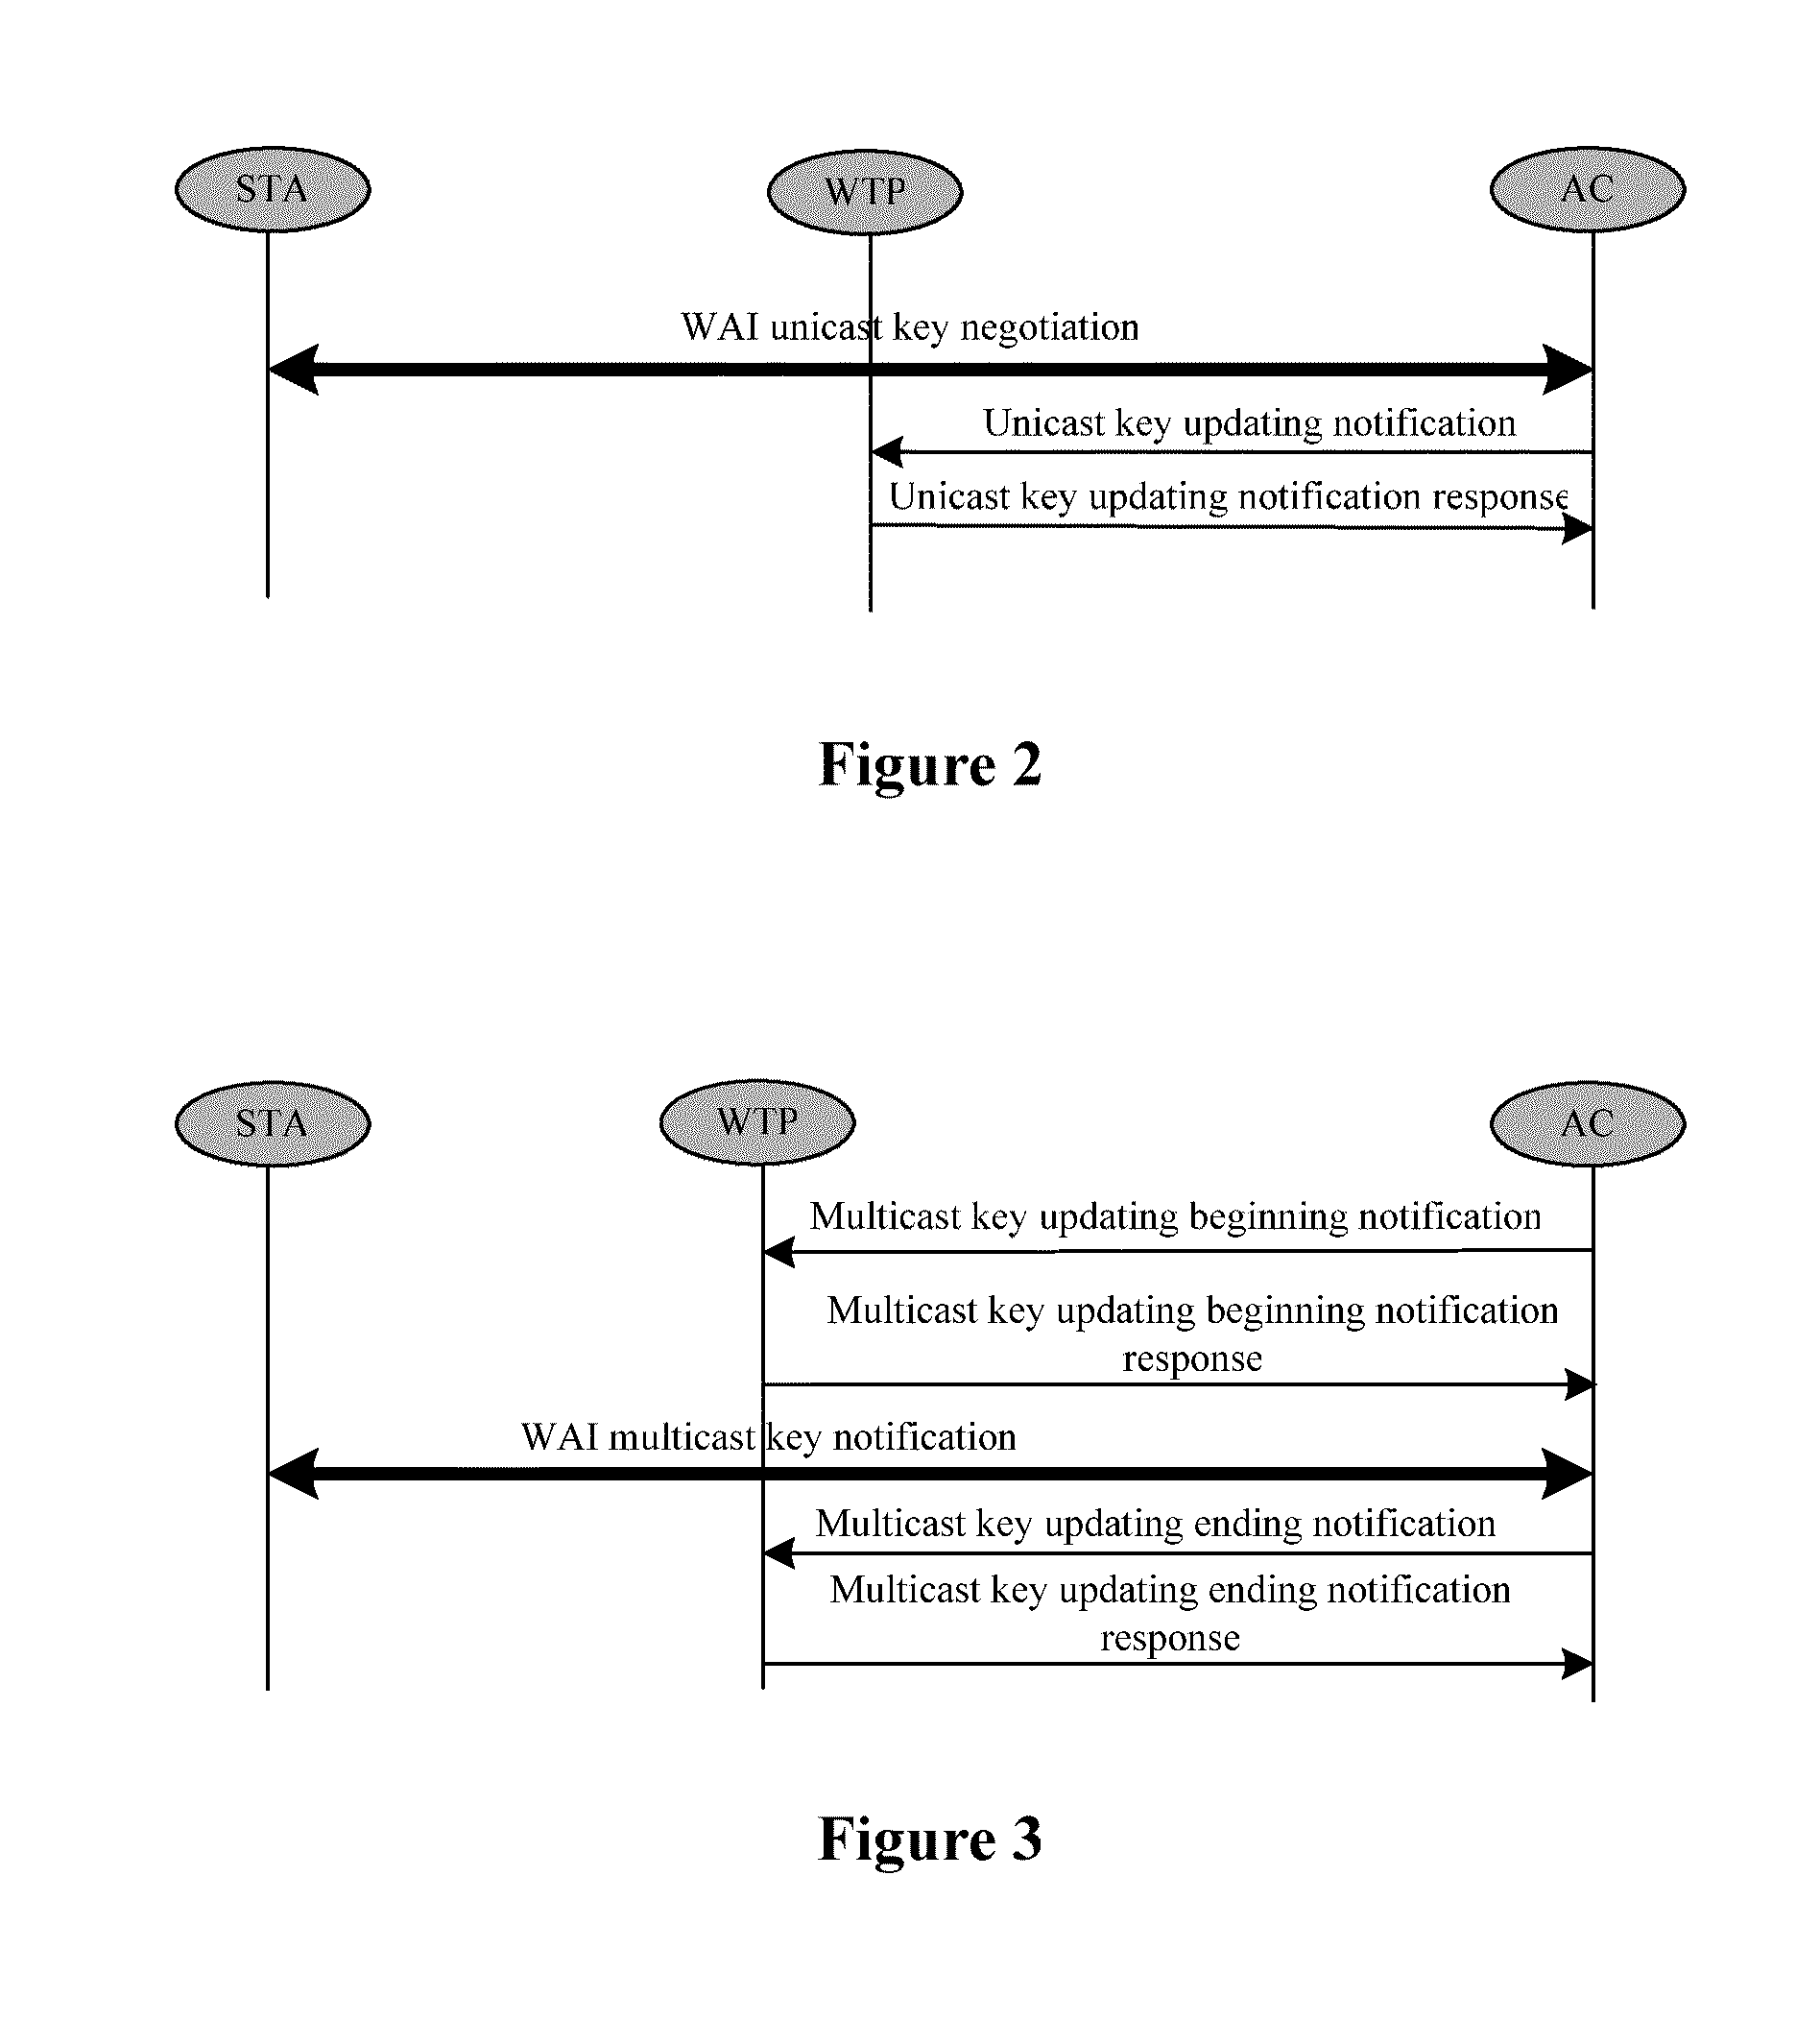 Method for implementing a convergent wireless local area network (WLAN) authentication and privacy infrastructure (WAPI) network architecture in a local MAC mode